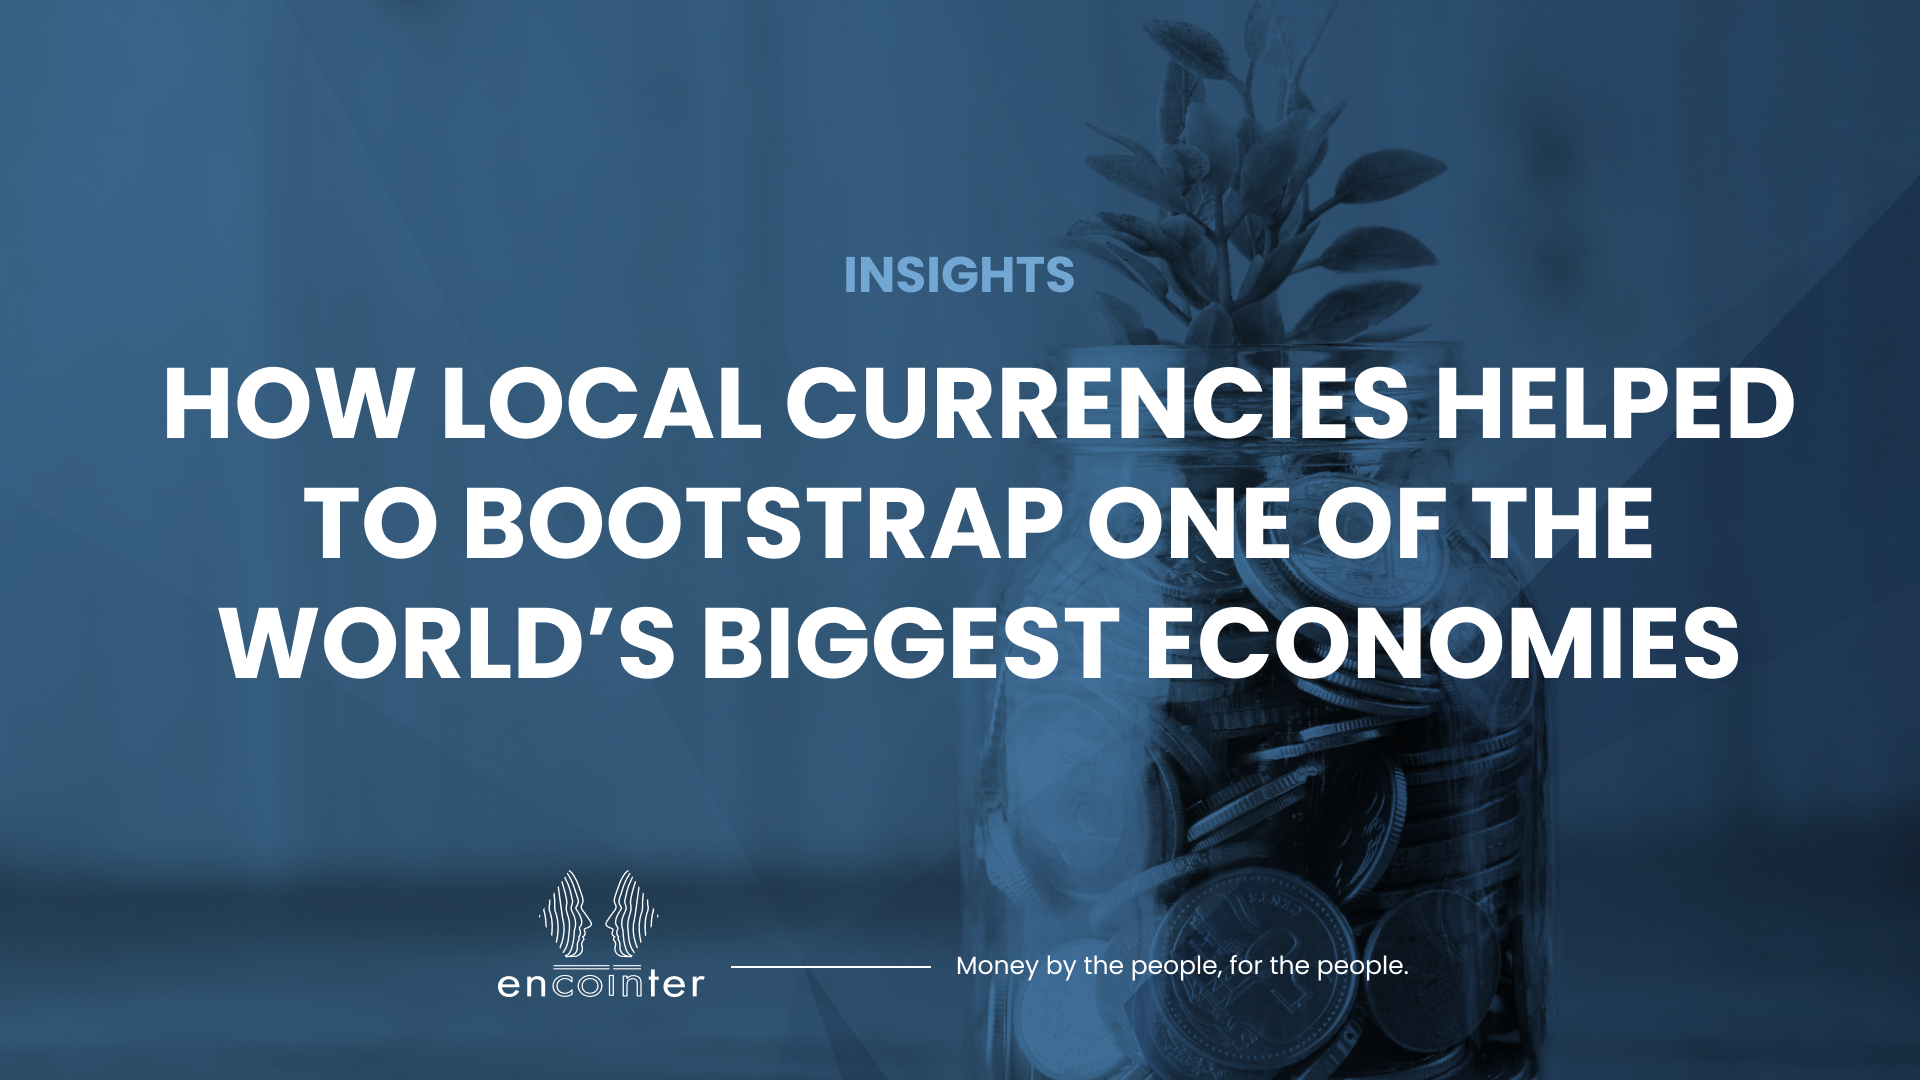 Encointer: How Local Currencies Helped to Bootstrap One of the World’s Biggest Economies